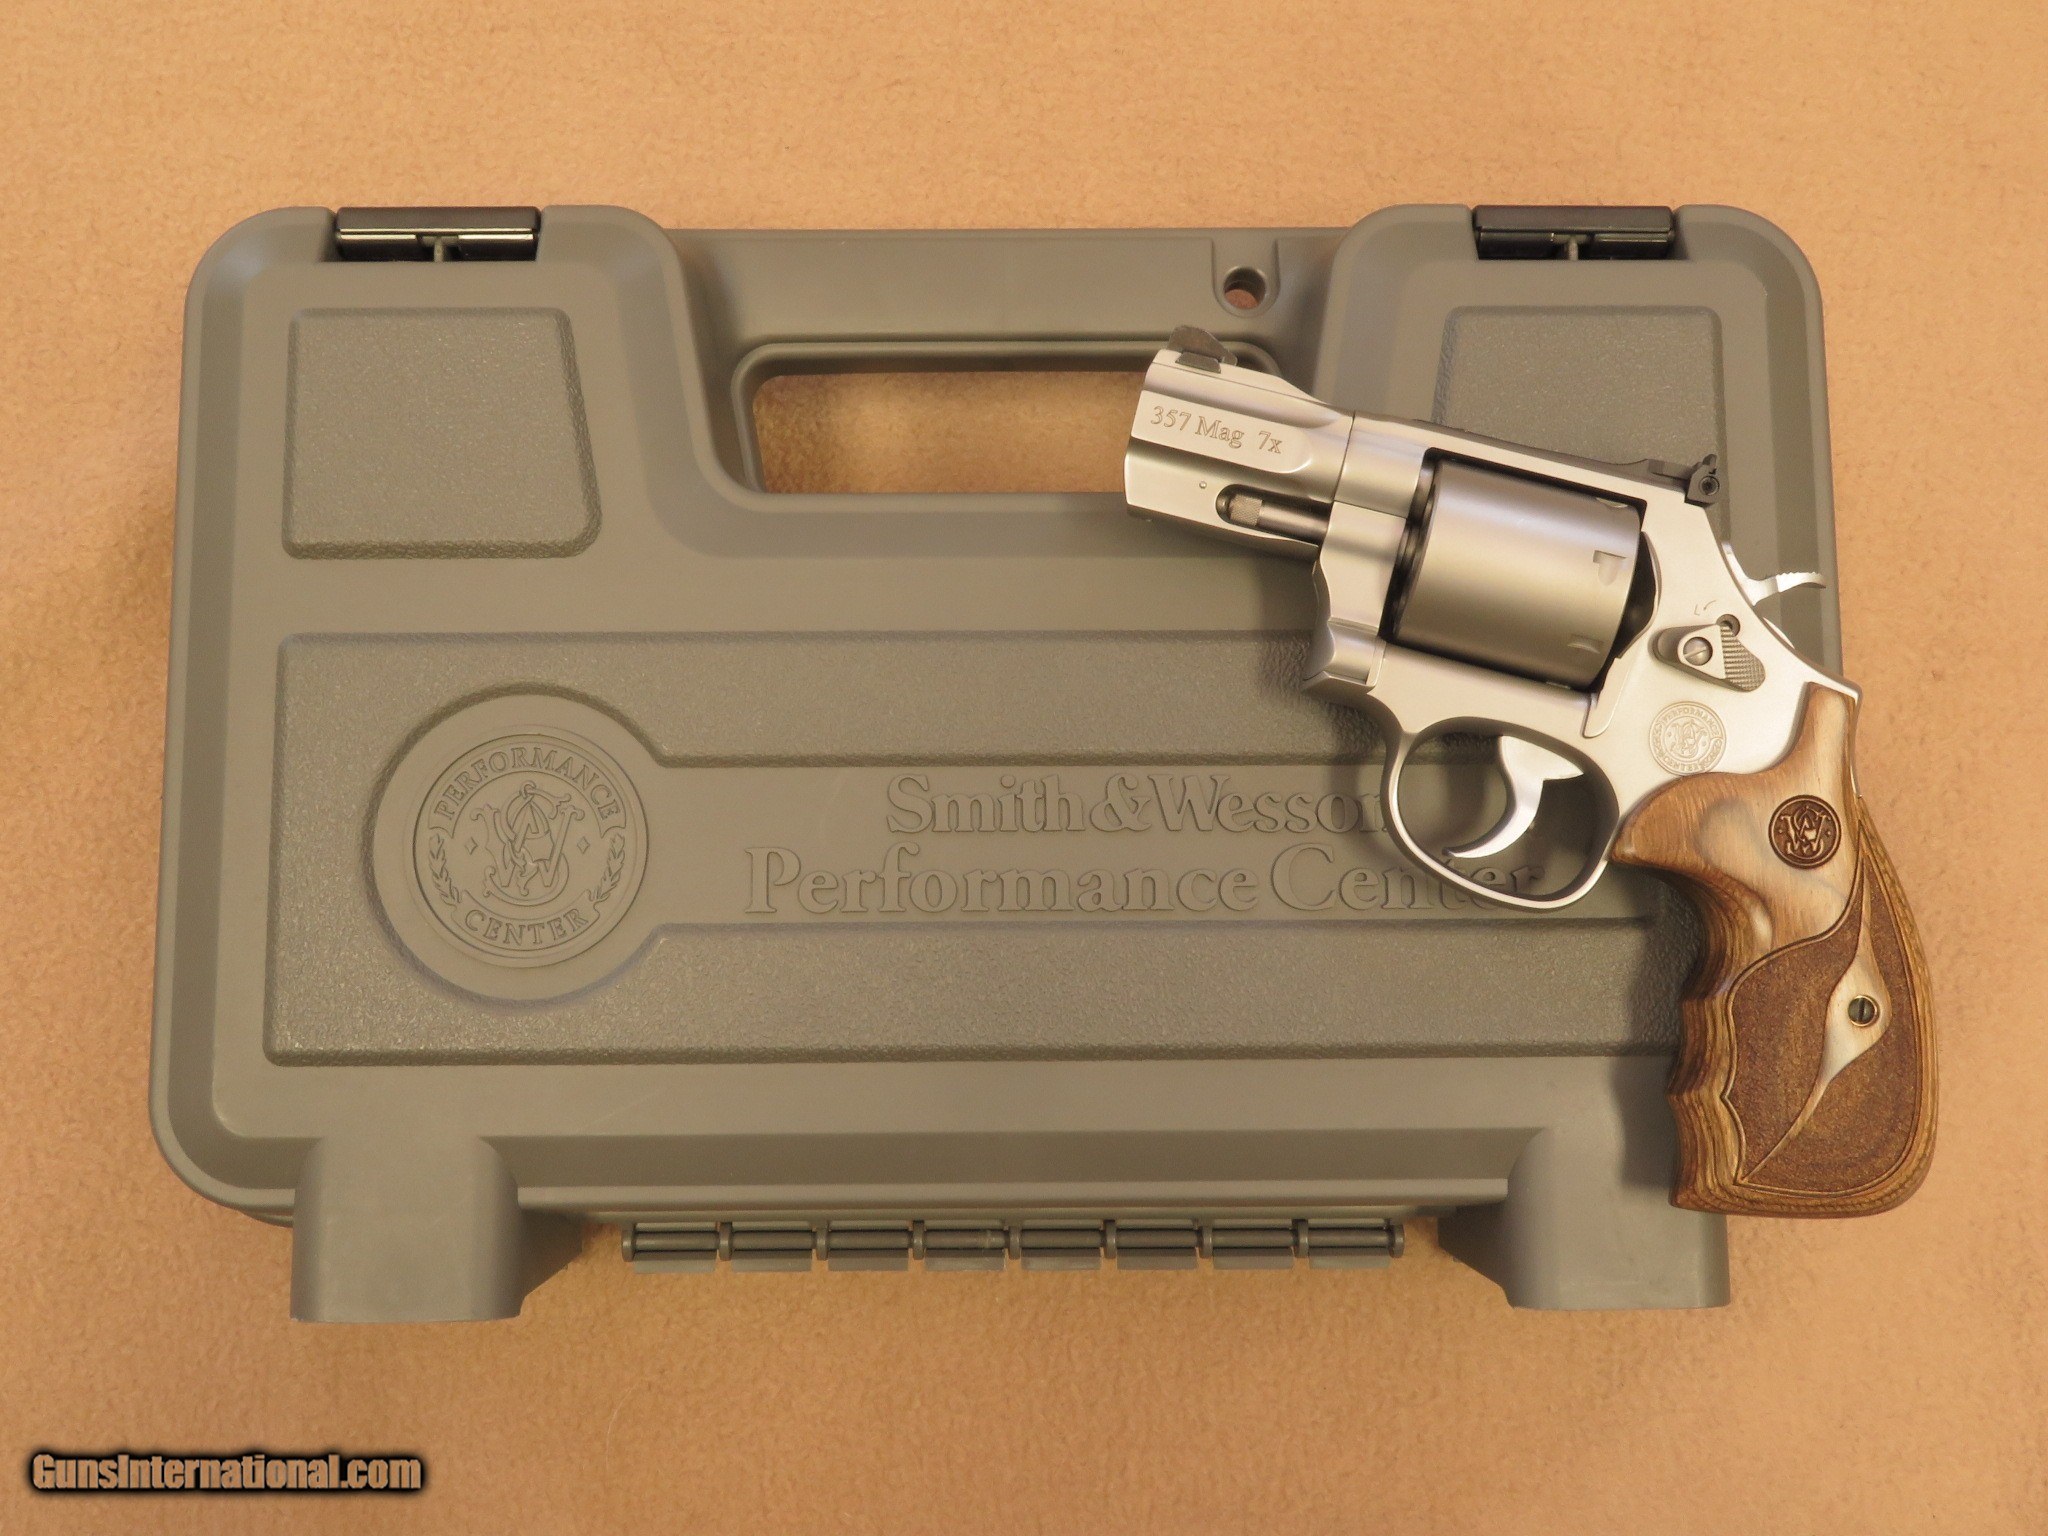 Smith & Wesson Model 686, Performance Center, 7-Shot .357 Ma